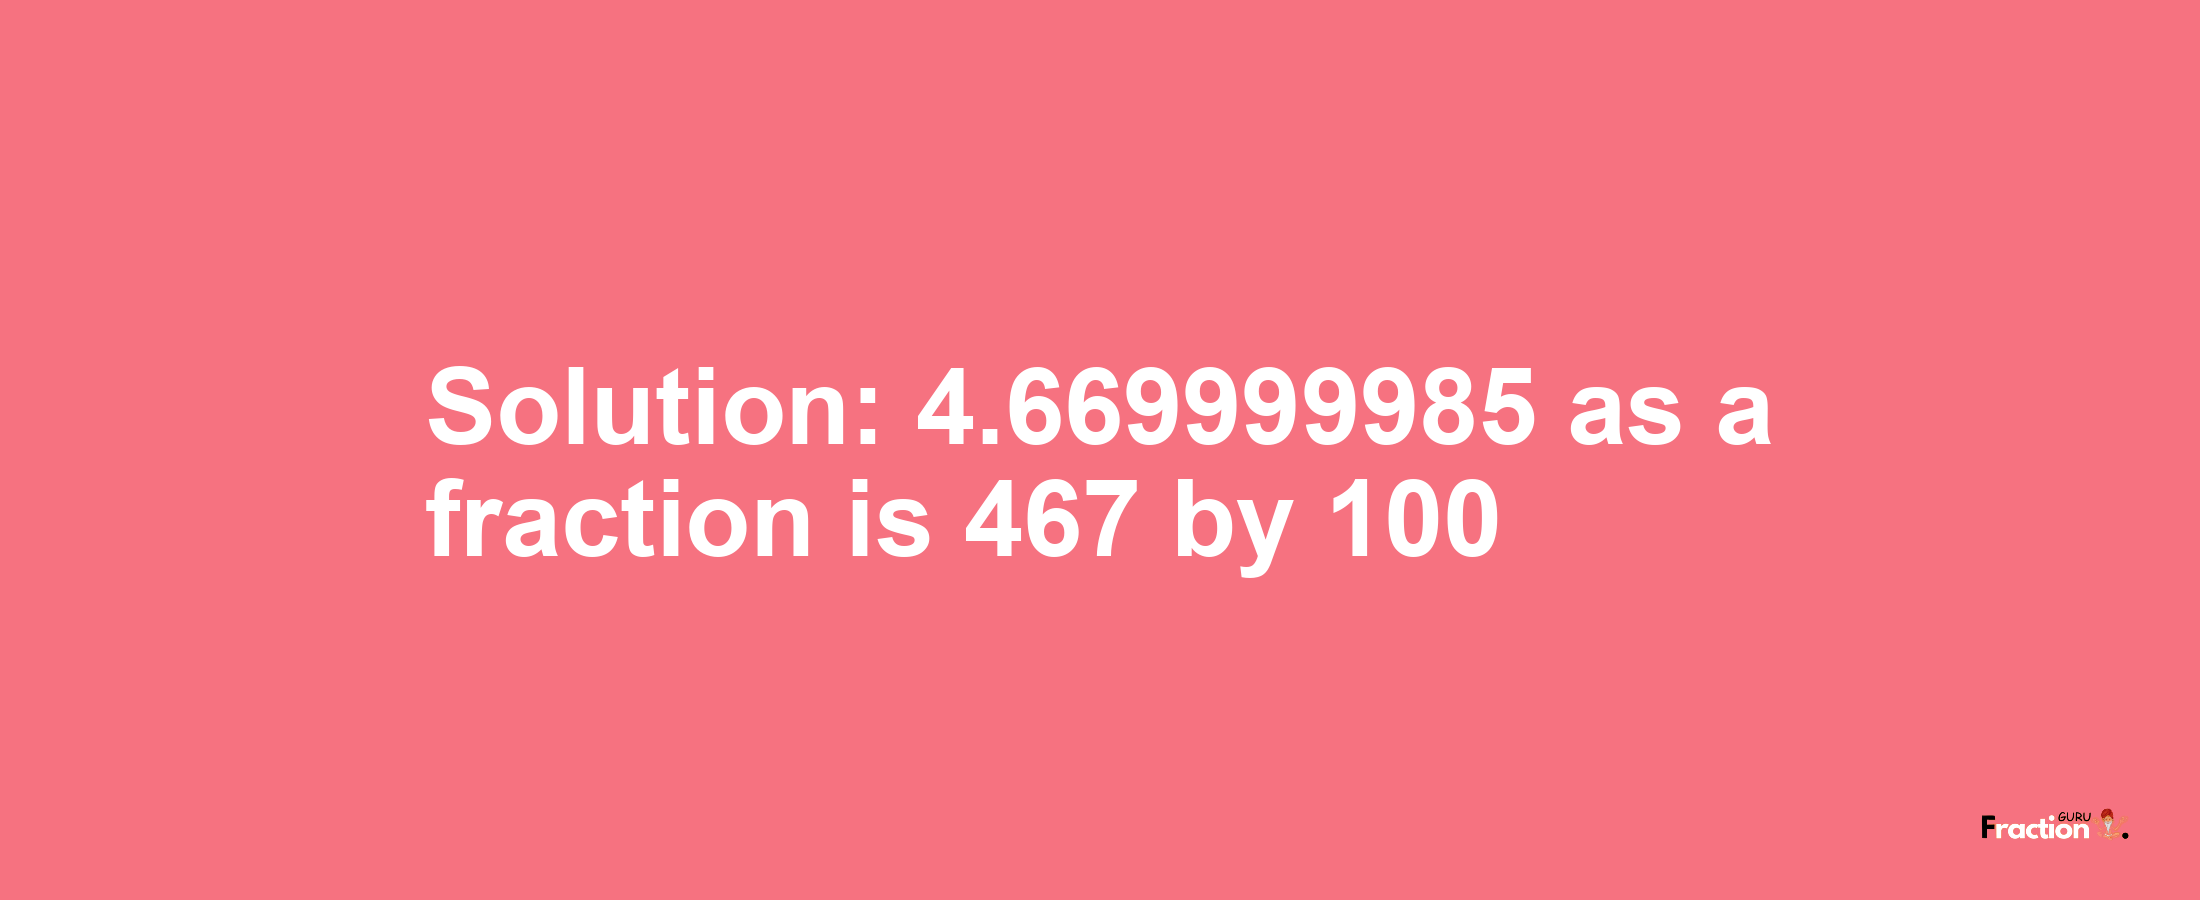 Solution:4.669999985 as a fraction is 467/100